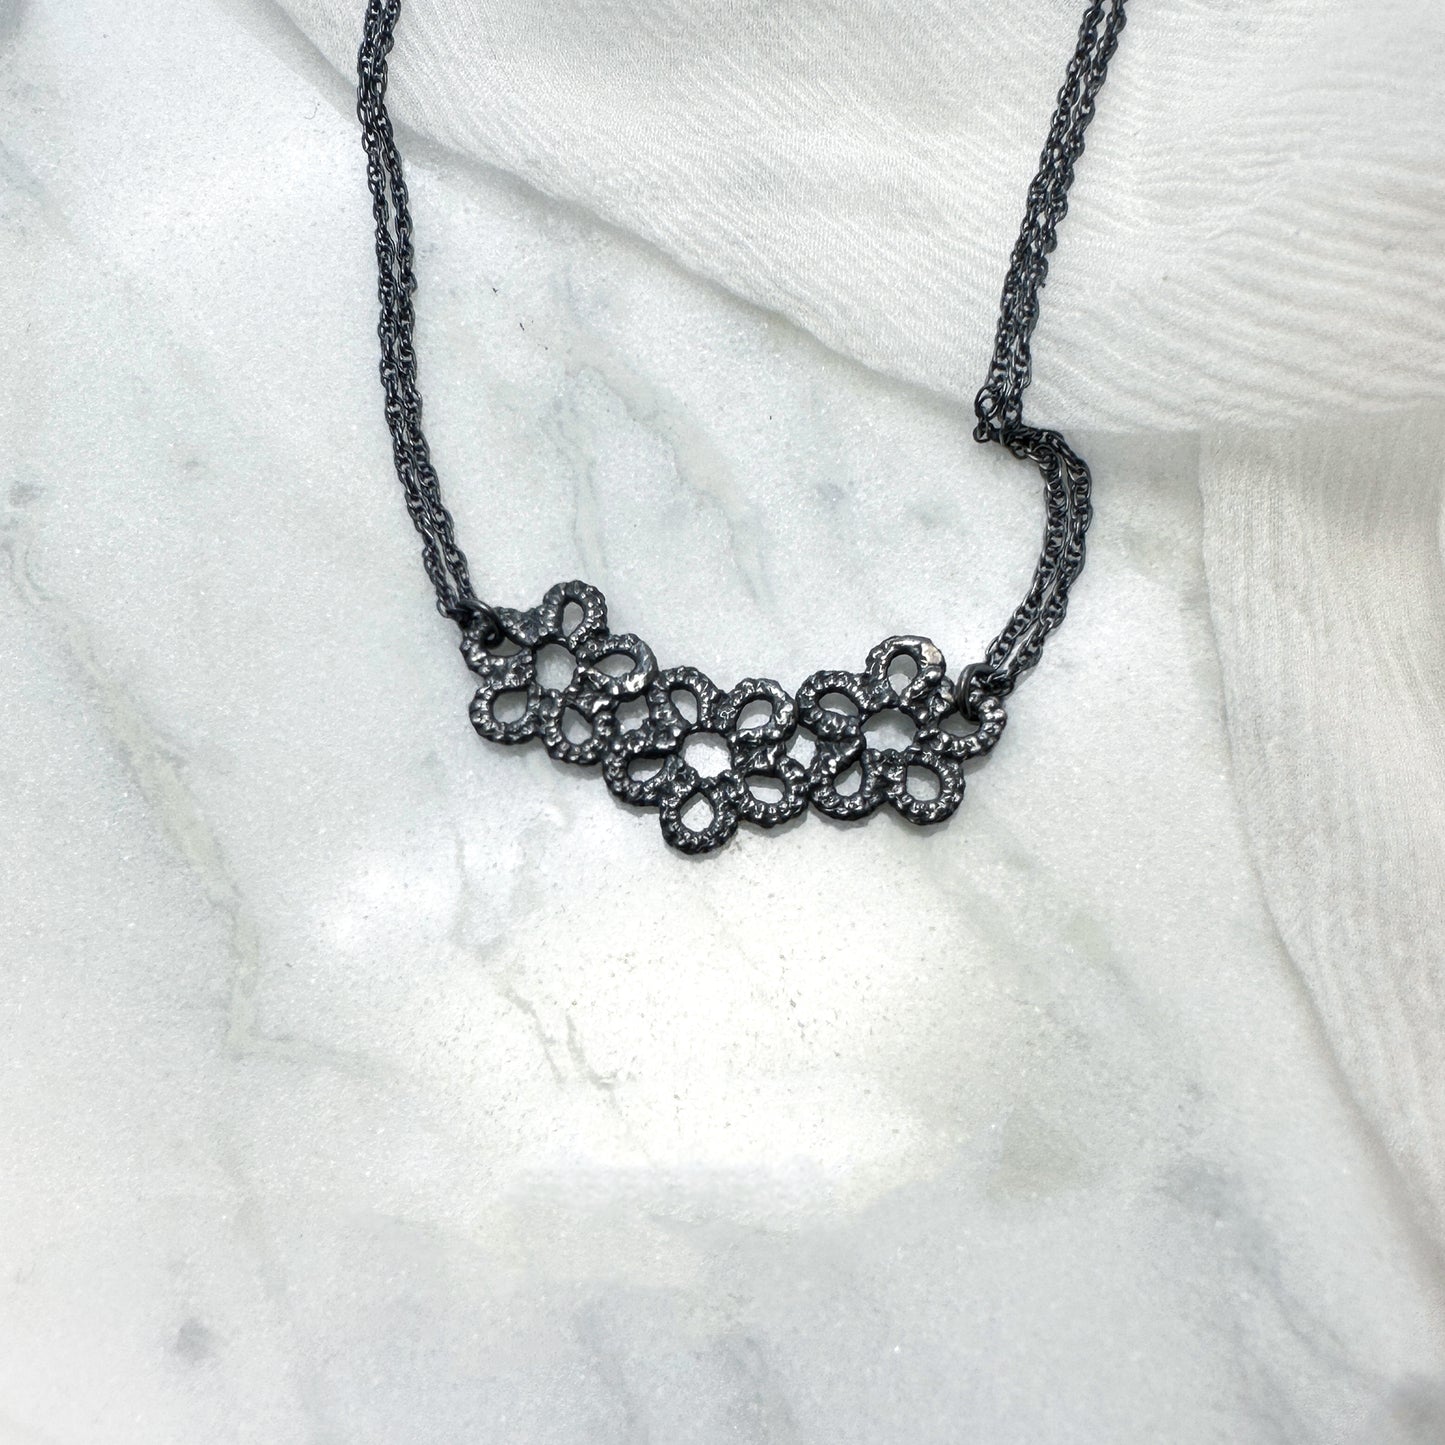 Forget-me-not trilogy necklace in oxidised silver